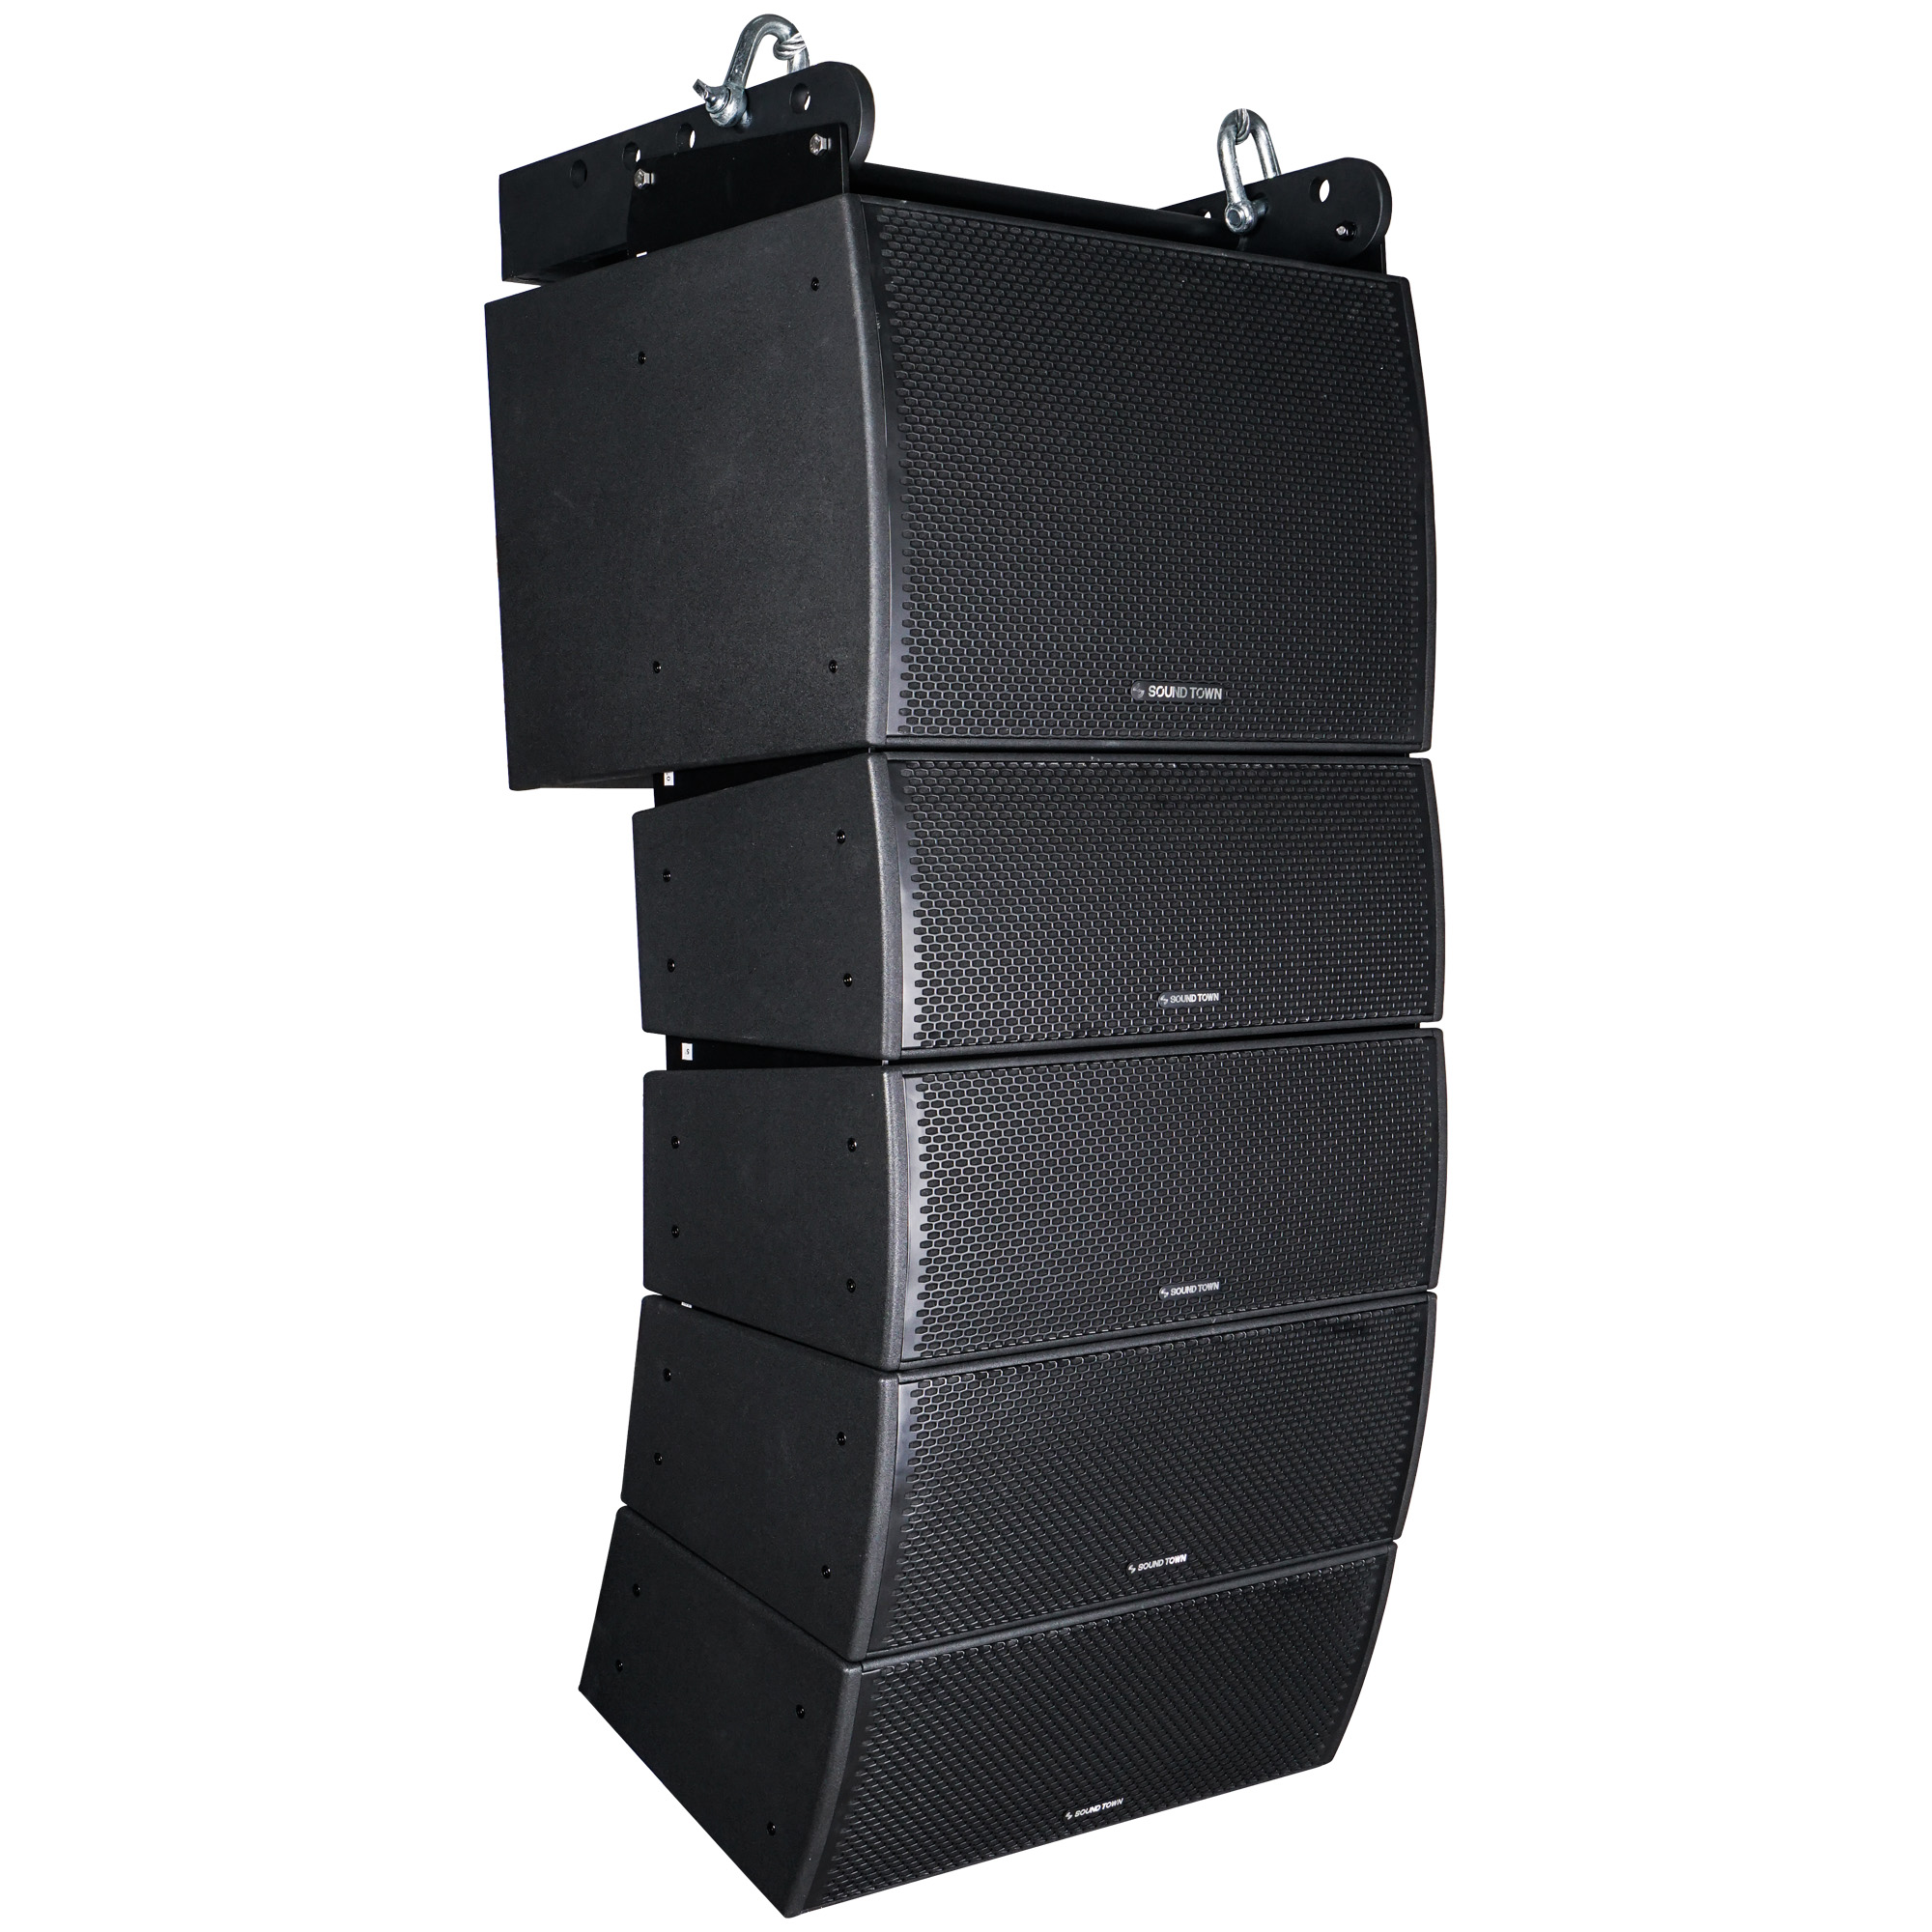 Sound Town All-Weather Line Array System with 15-inch Water-Resistant Line Array Subwoofer, Four Compact Dual 8-inch Line Array PA Speakers, Full Range/Bi-amp Switchable, Black (ZETHUS-IP115S208X4) - image 1 of 8